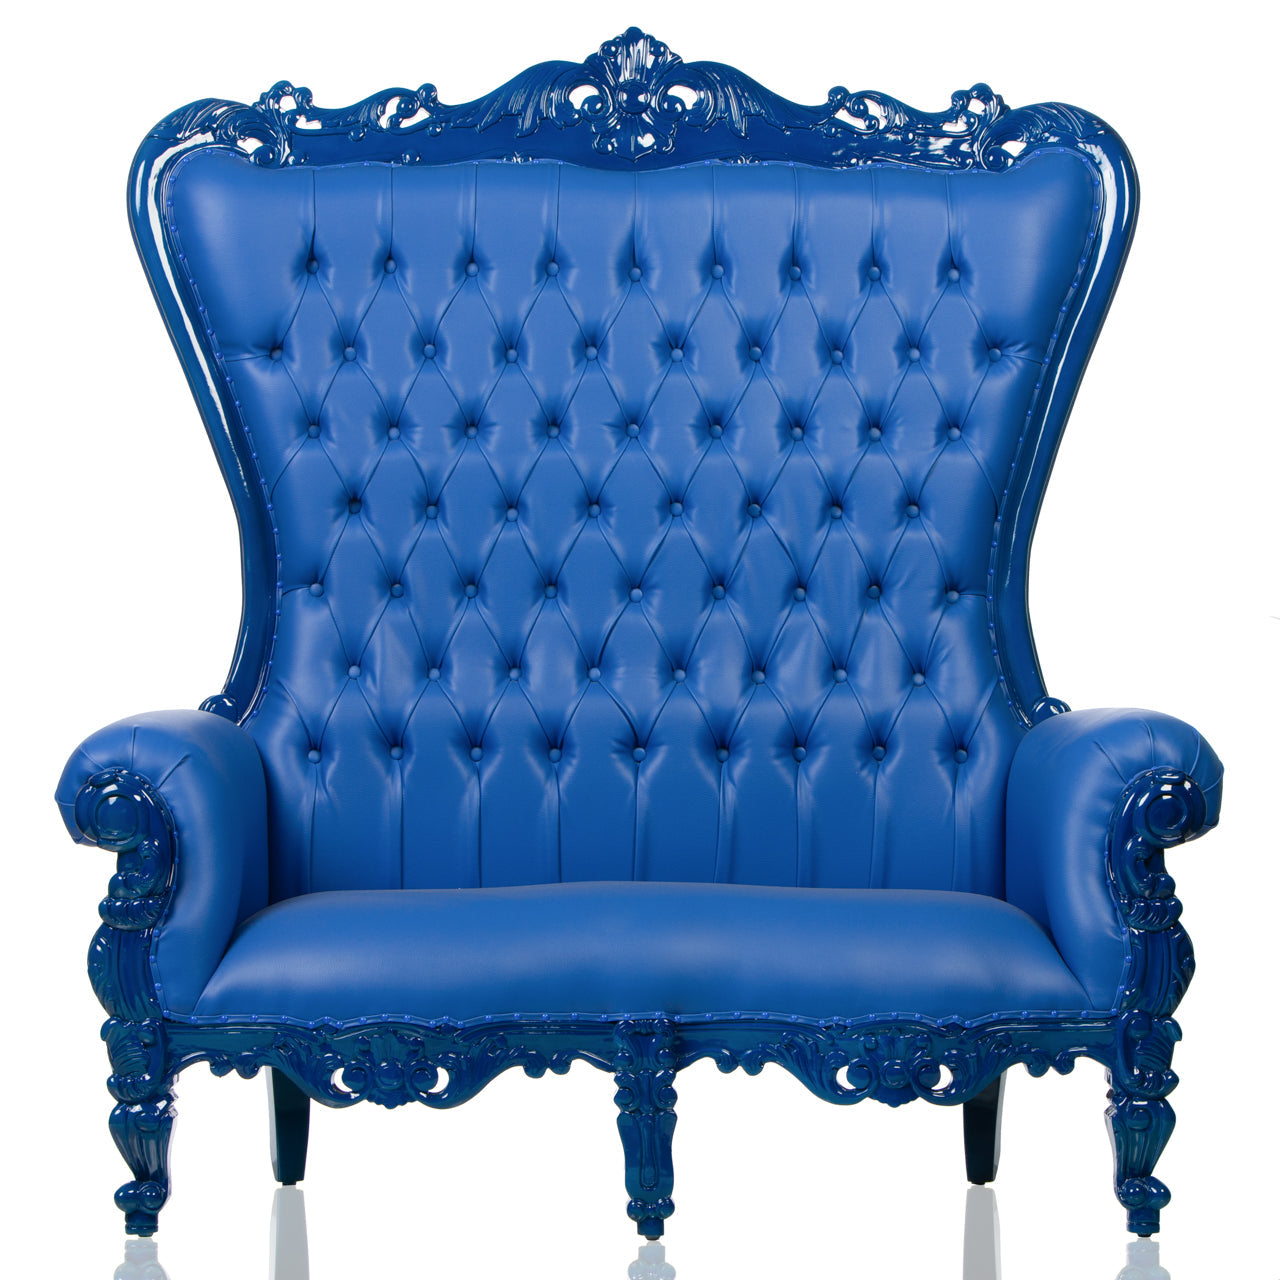 Florida Blue Double Throne (Blue/Blue Leather)